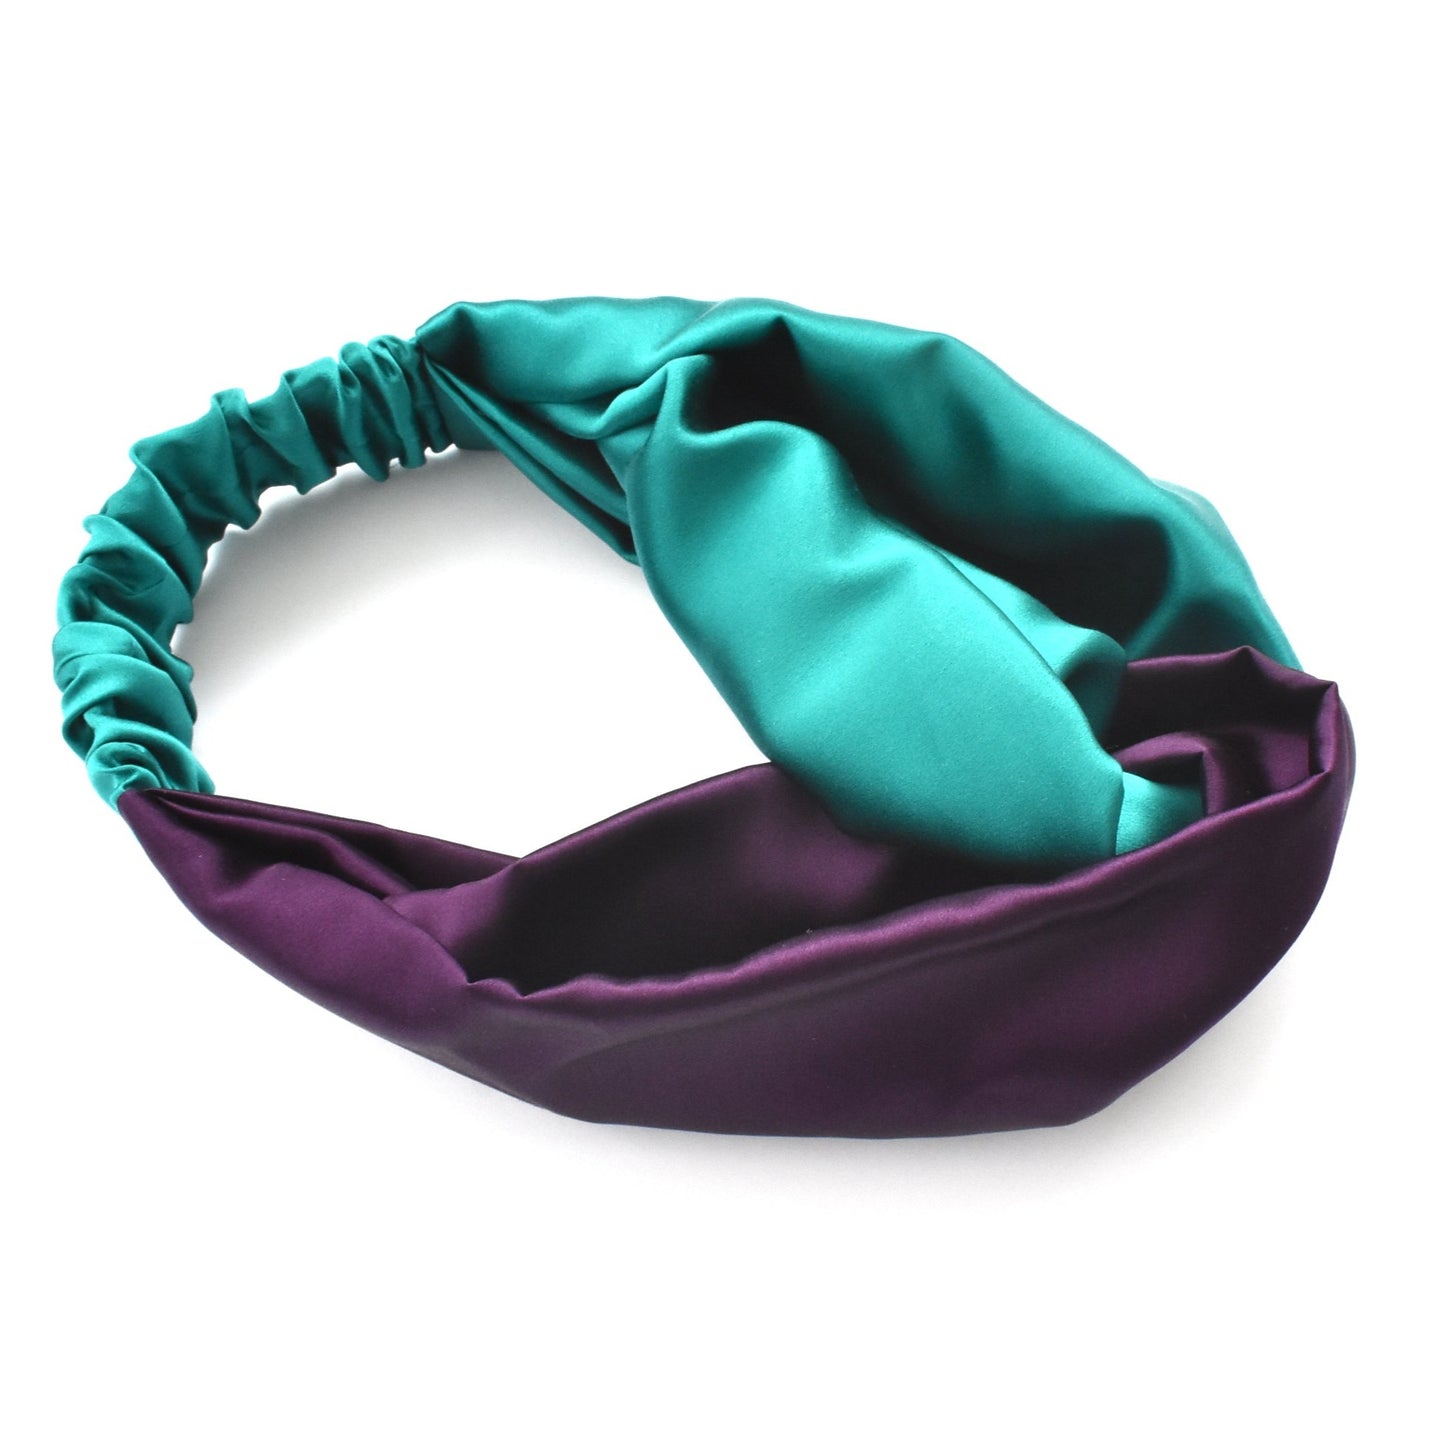 Aubergine & Turquoise Split Twisted Turban hairband and neck scarf in Mulberry Silk - 100% pure silk satin